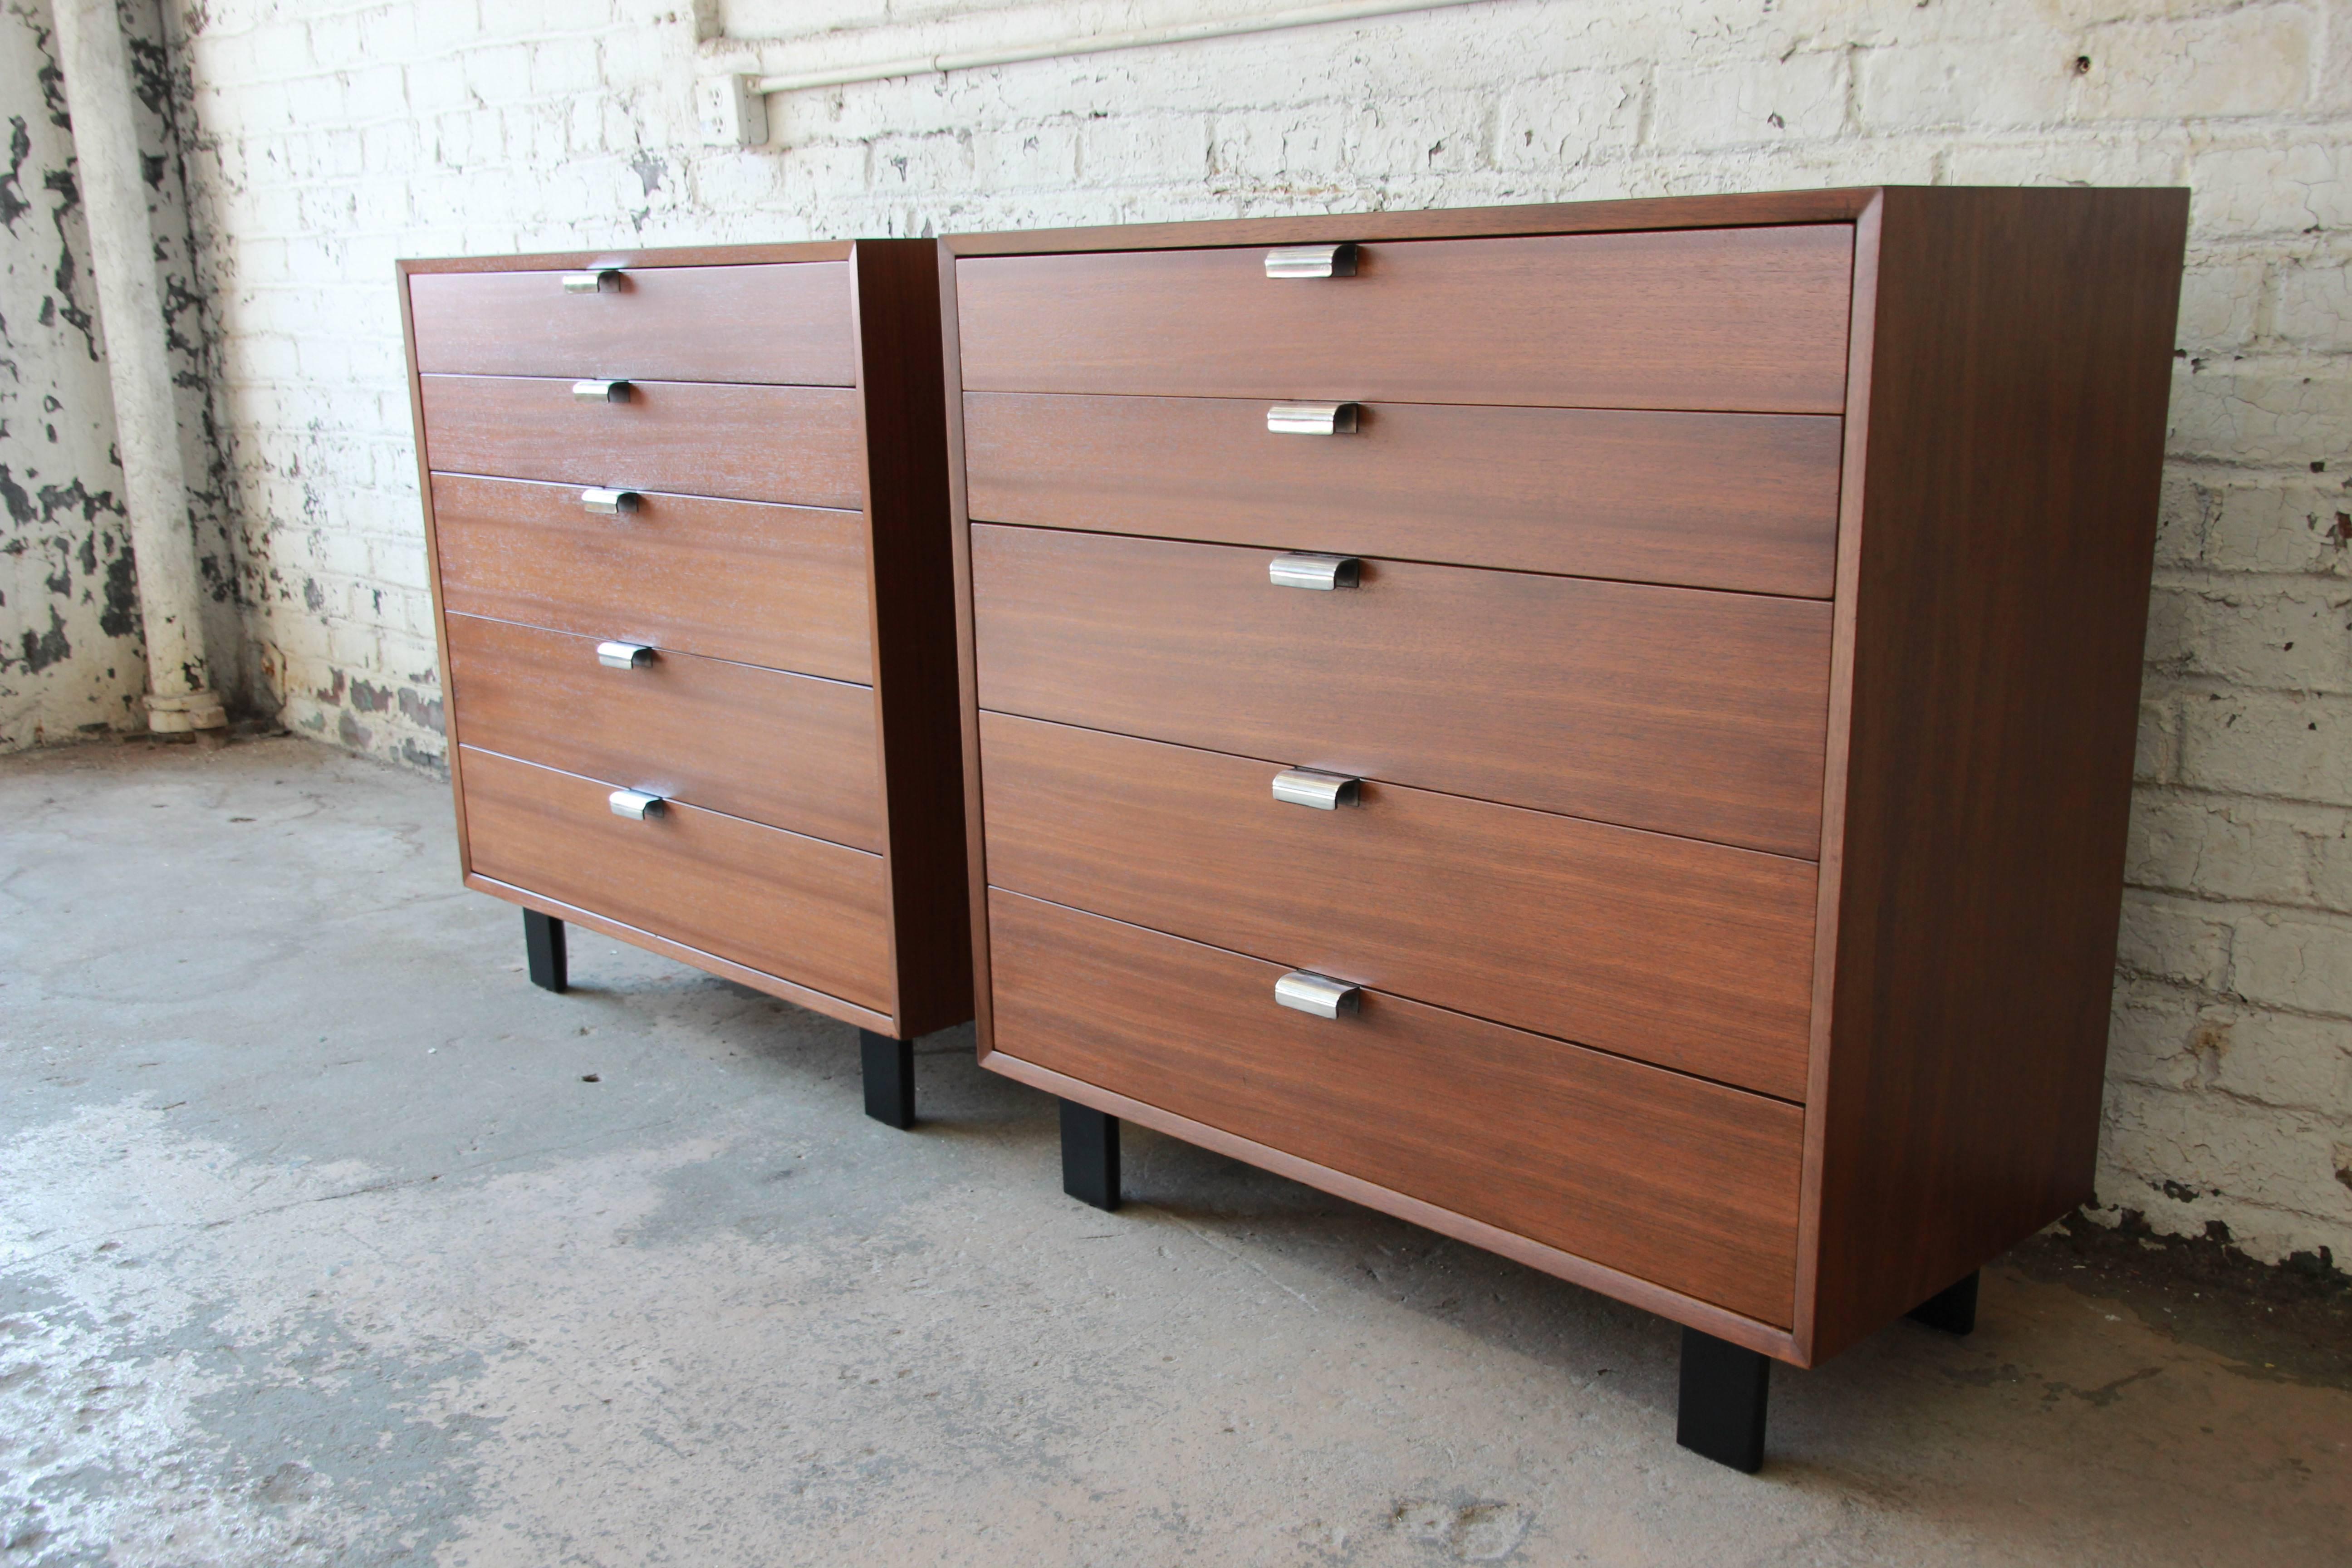 Offering a rare and exceptional mid-century modern chest of drawers by iconic designer George Nelson for Herman Miller. The dresser features beautiful walnut wood grain and black lacquered legs. It offers ample room for storage, with five deep